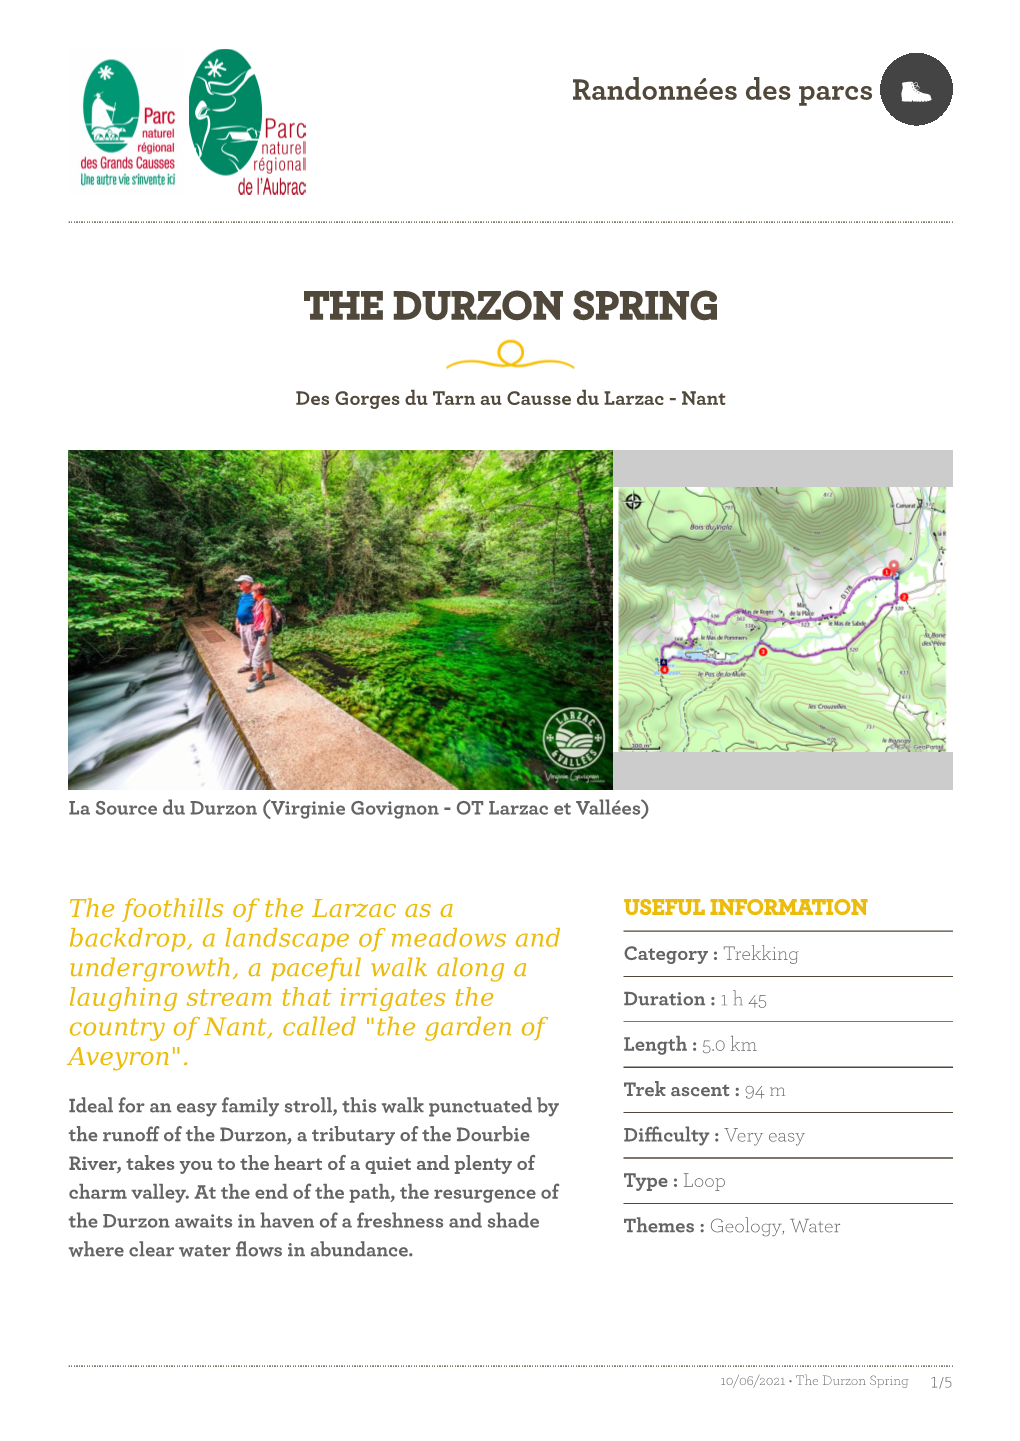 The Durzon Spring